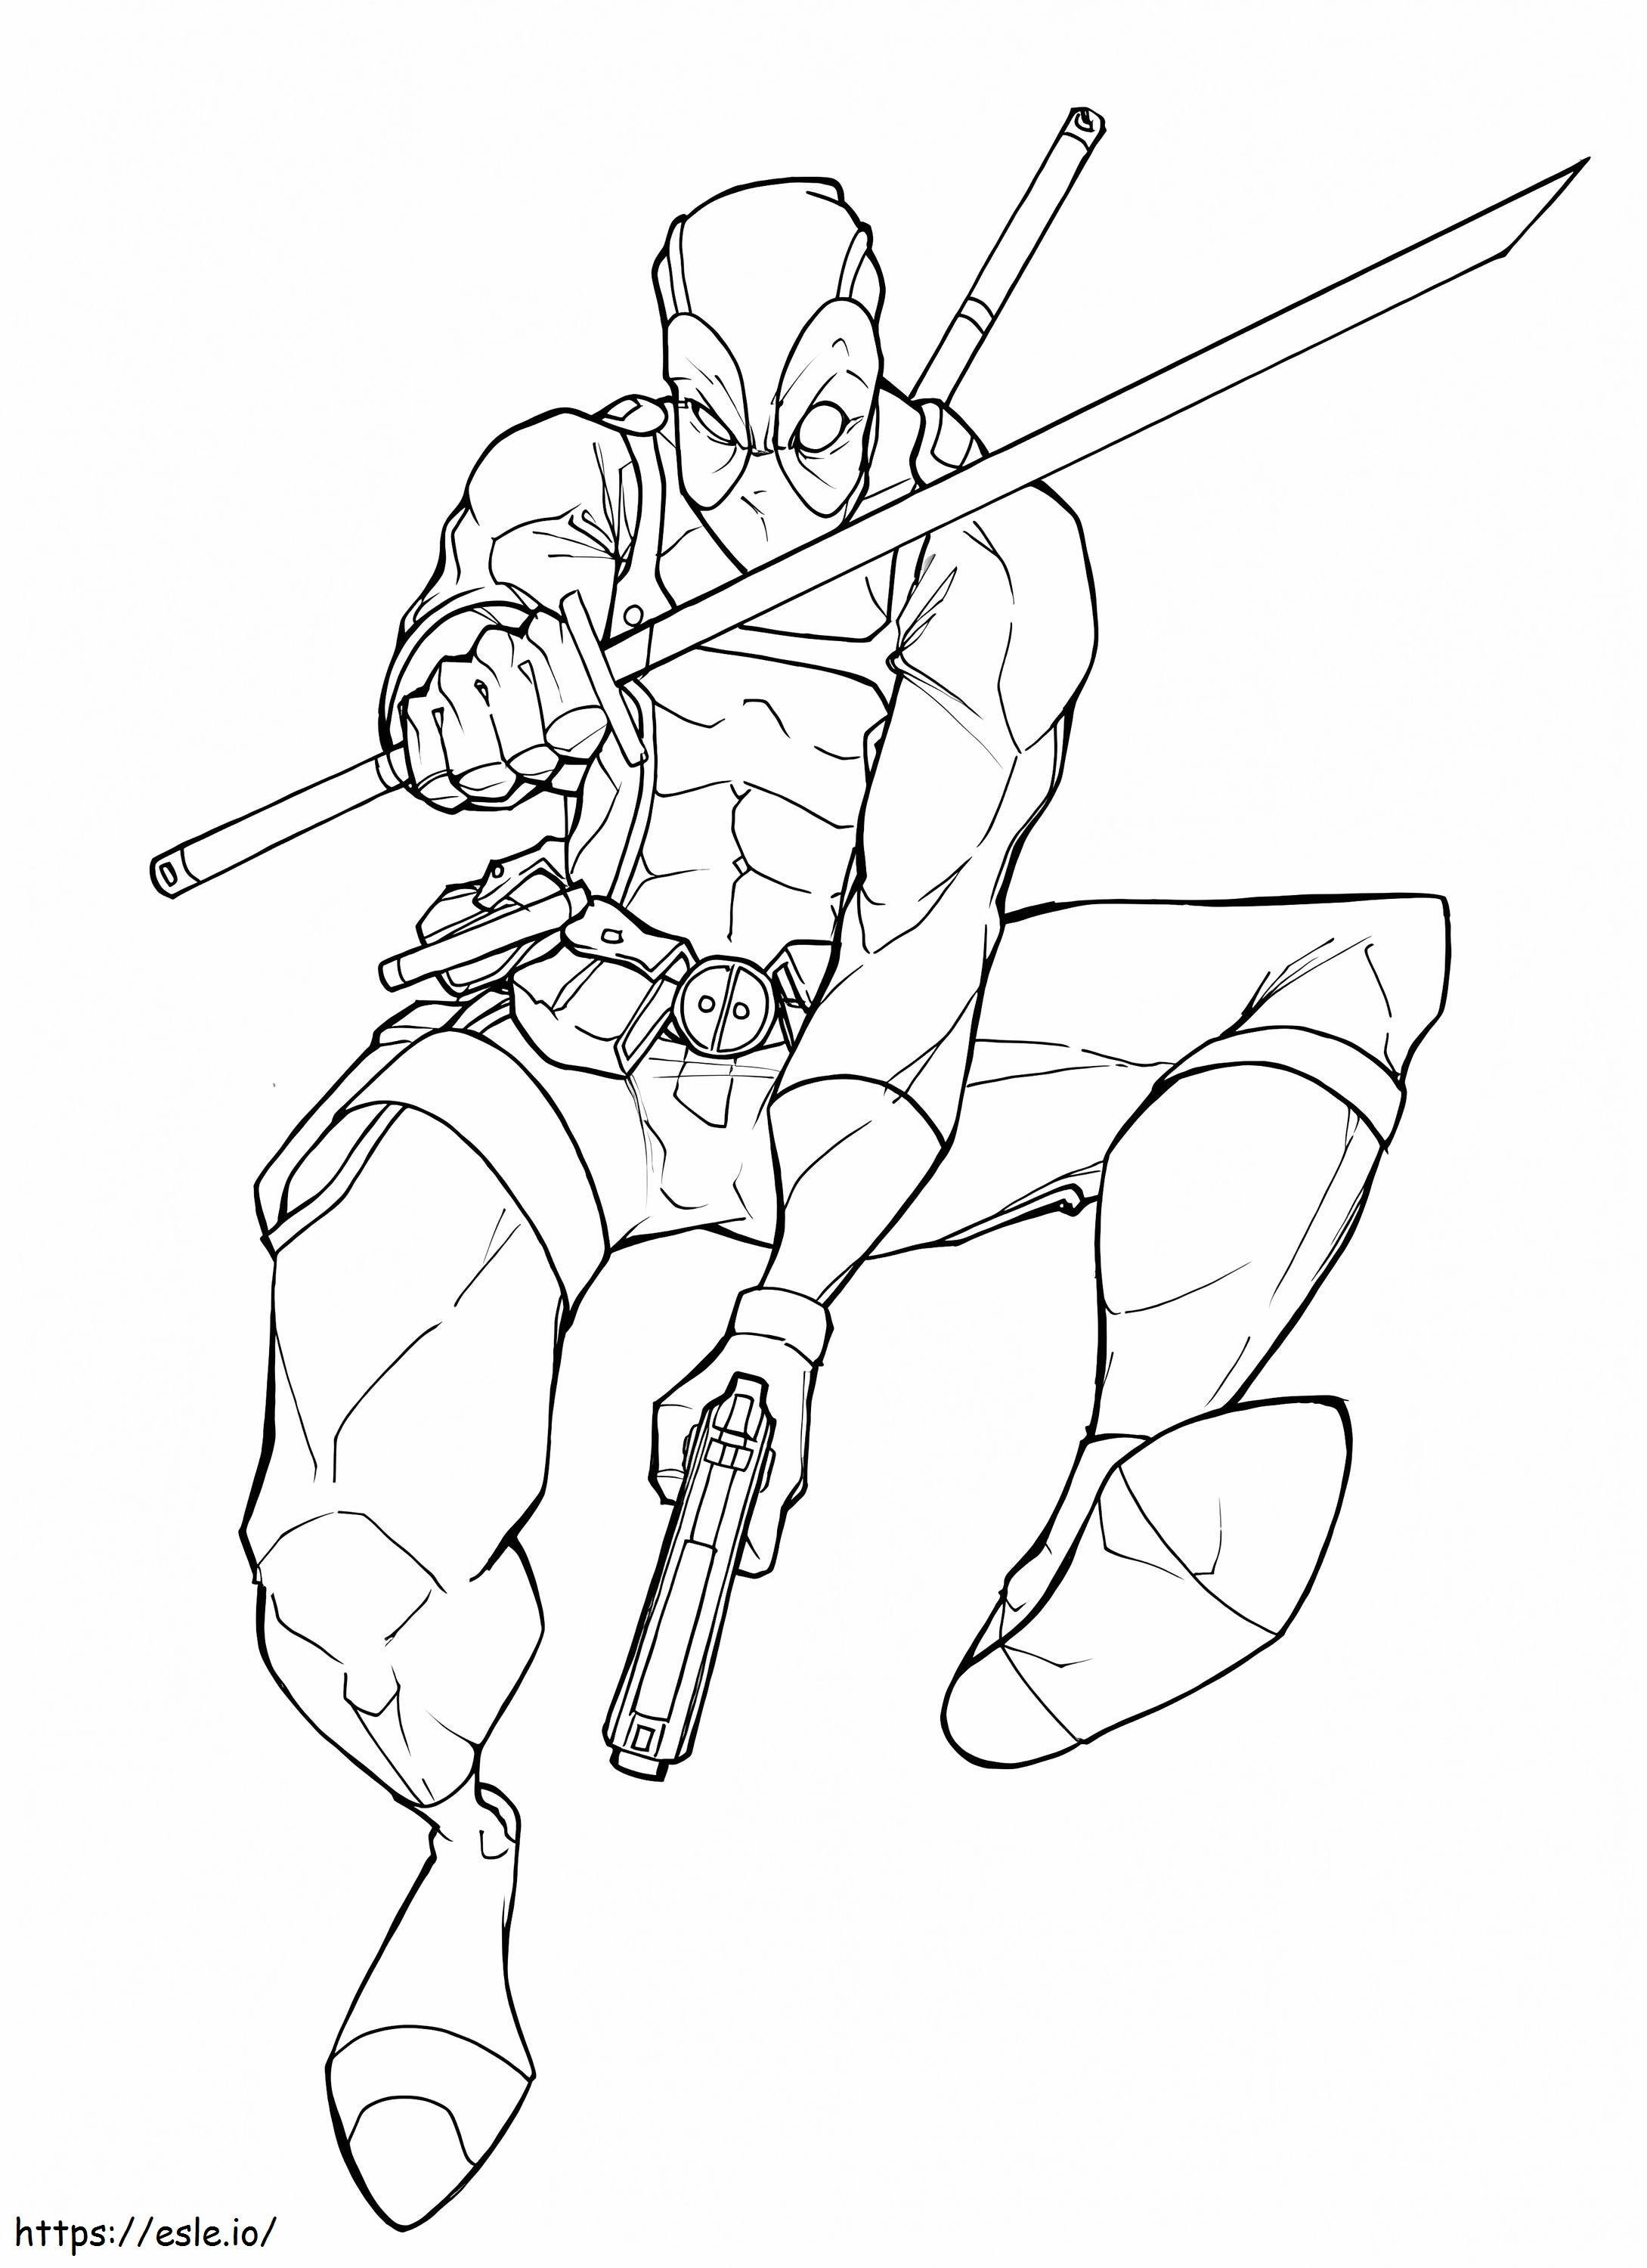 Deadpool Holding Swords coloring page